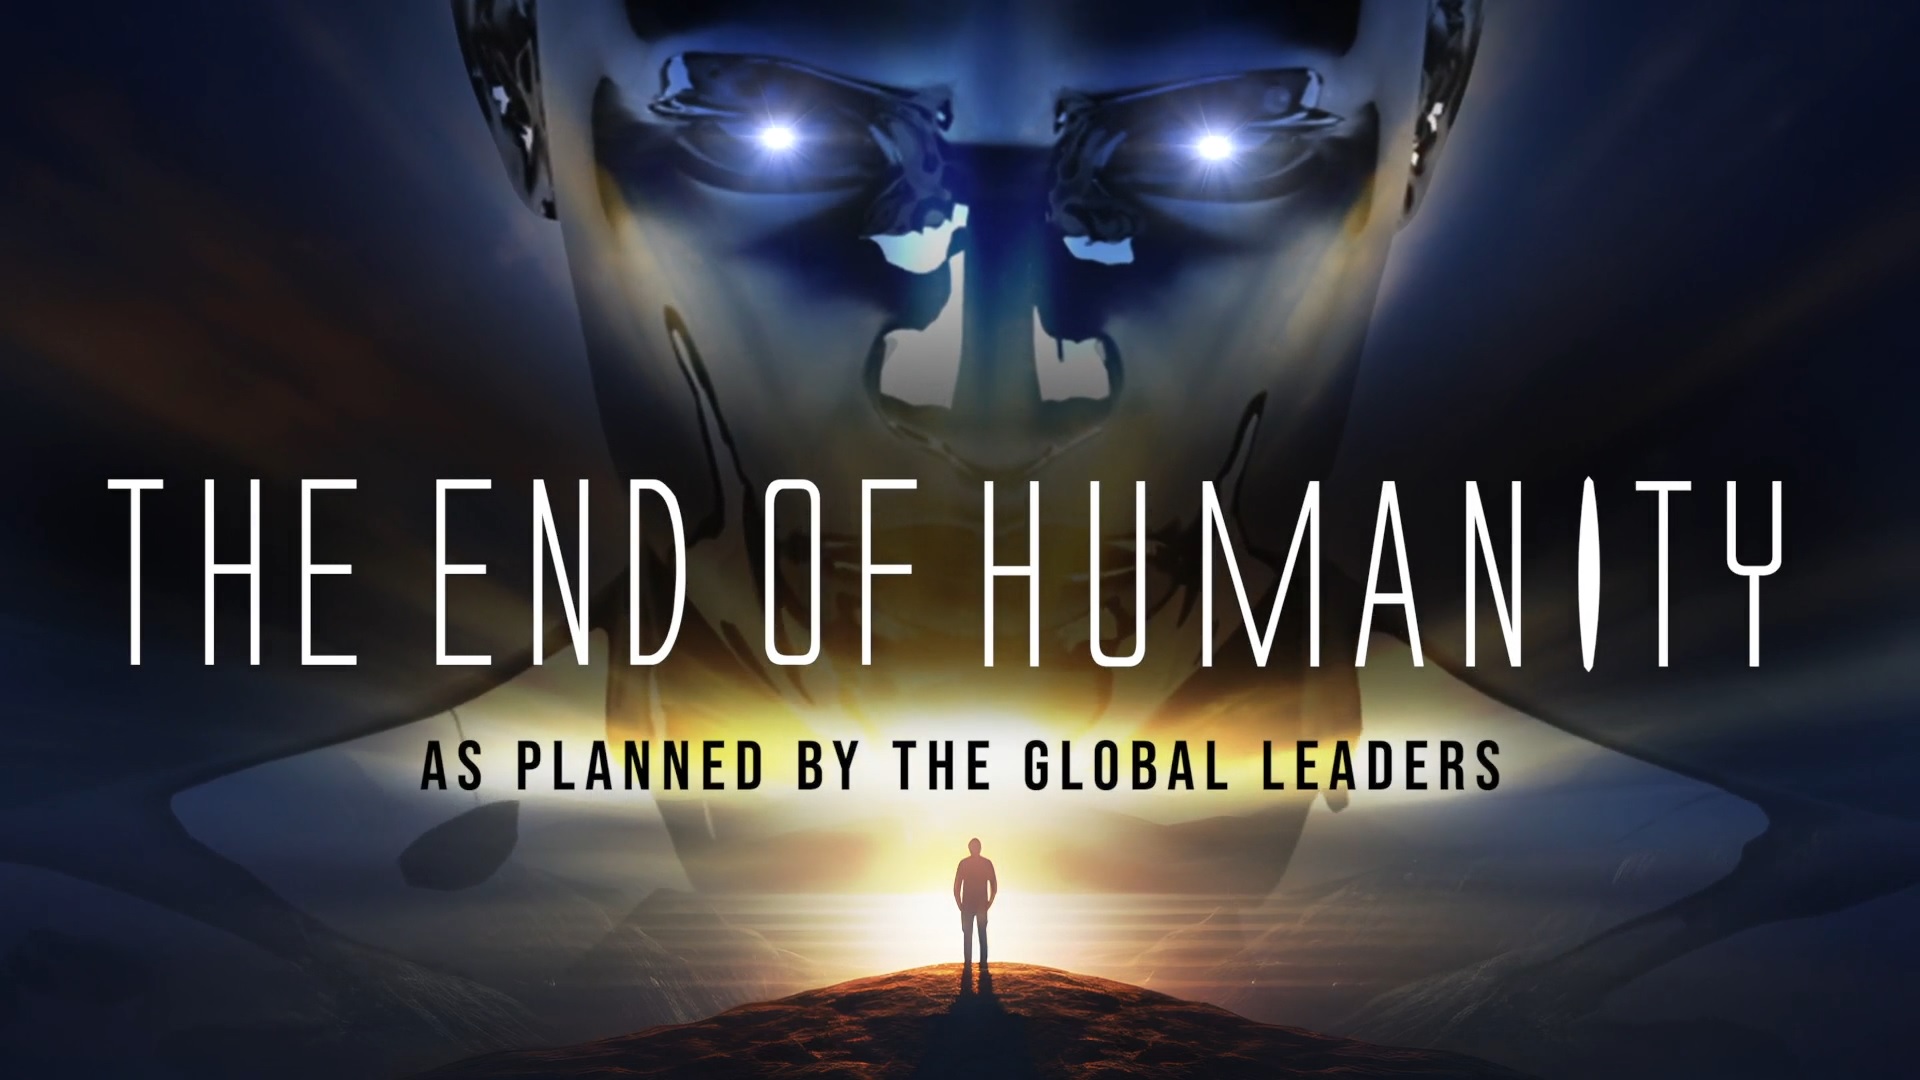 THE END OF HUMANITY - As Planned By The Global Leaders